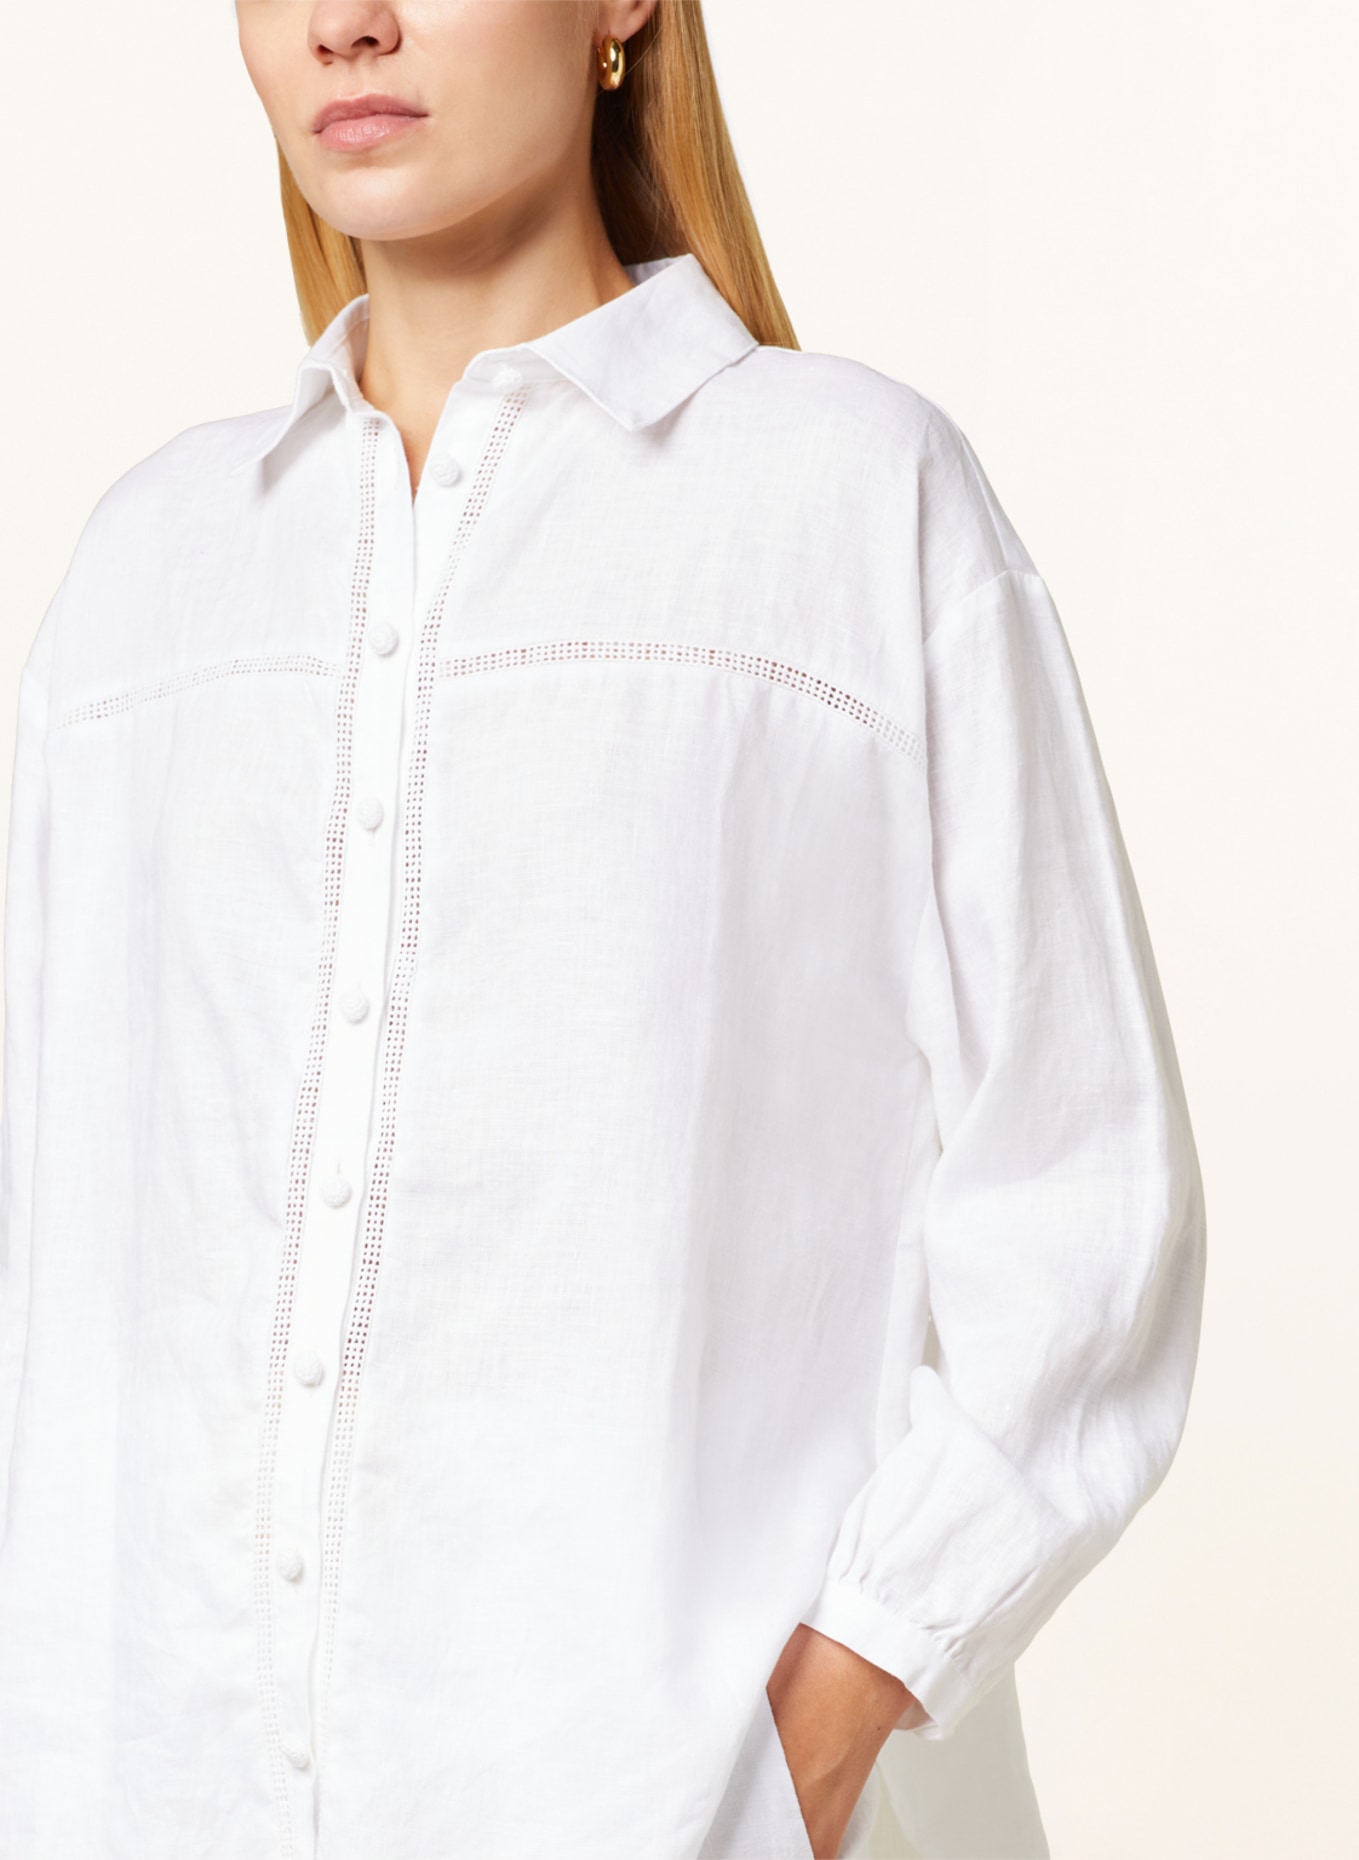 Princess GOES HOLLYWOOD Shirt blouse made of linen, Color: WHITE (Image 4)